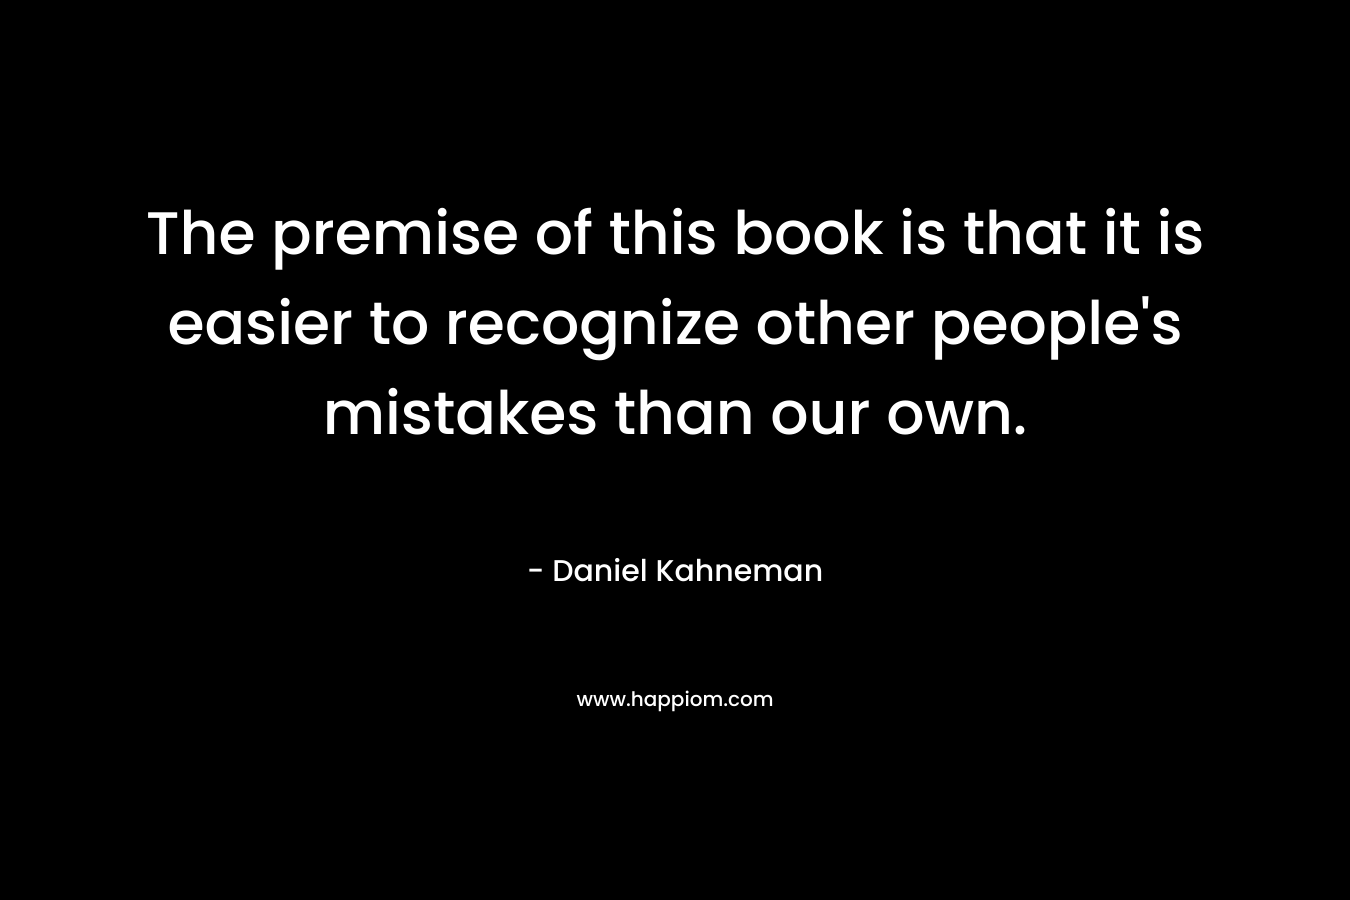 The premise of this book is that it is easier to recognize other people's mistakes than our own.